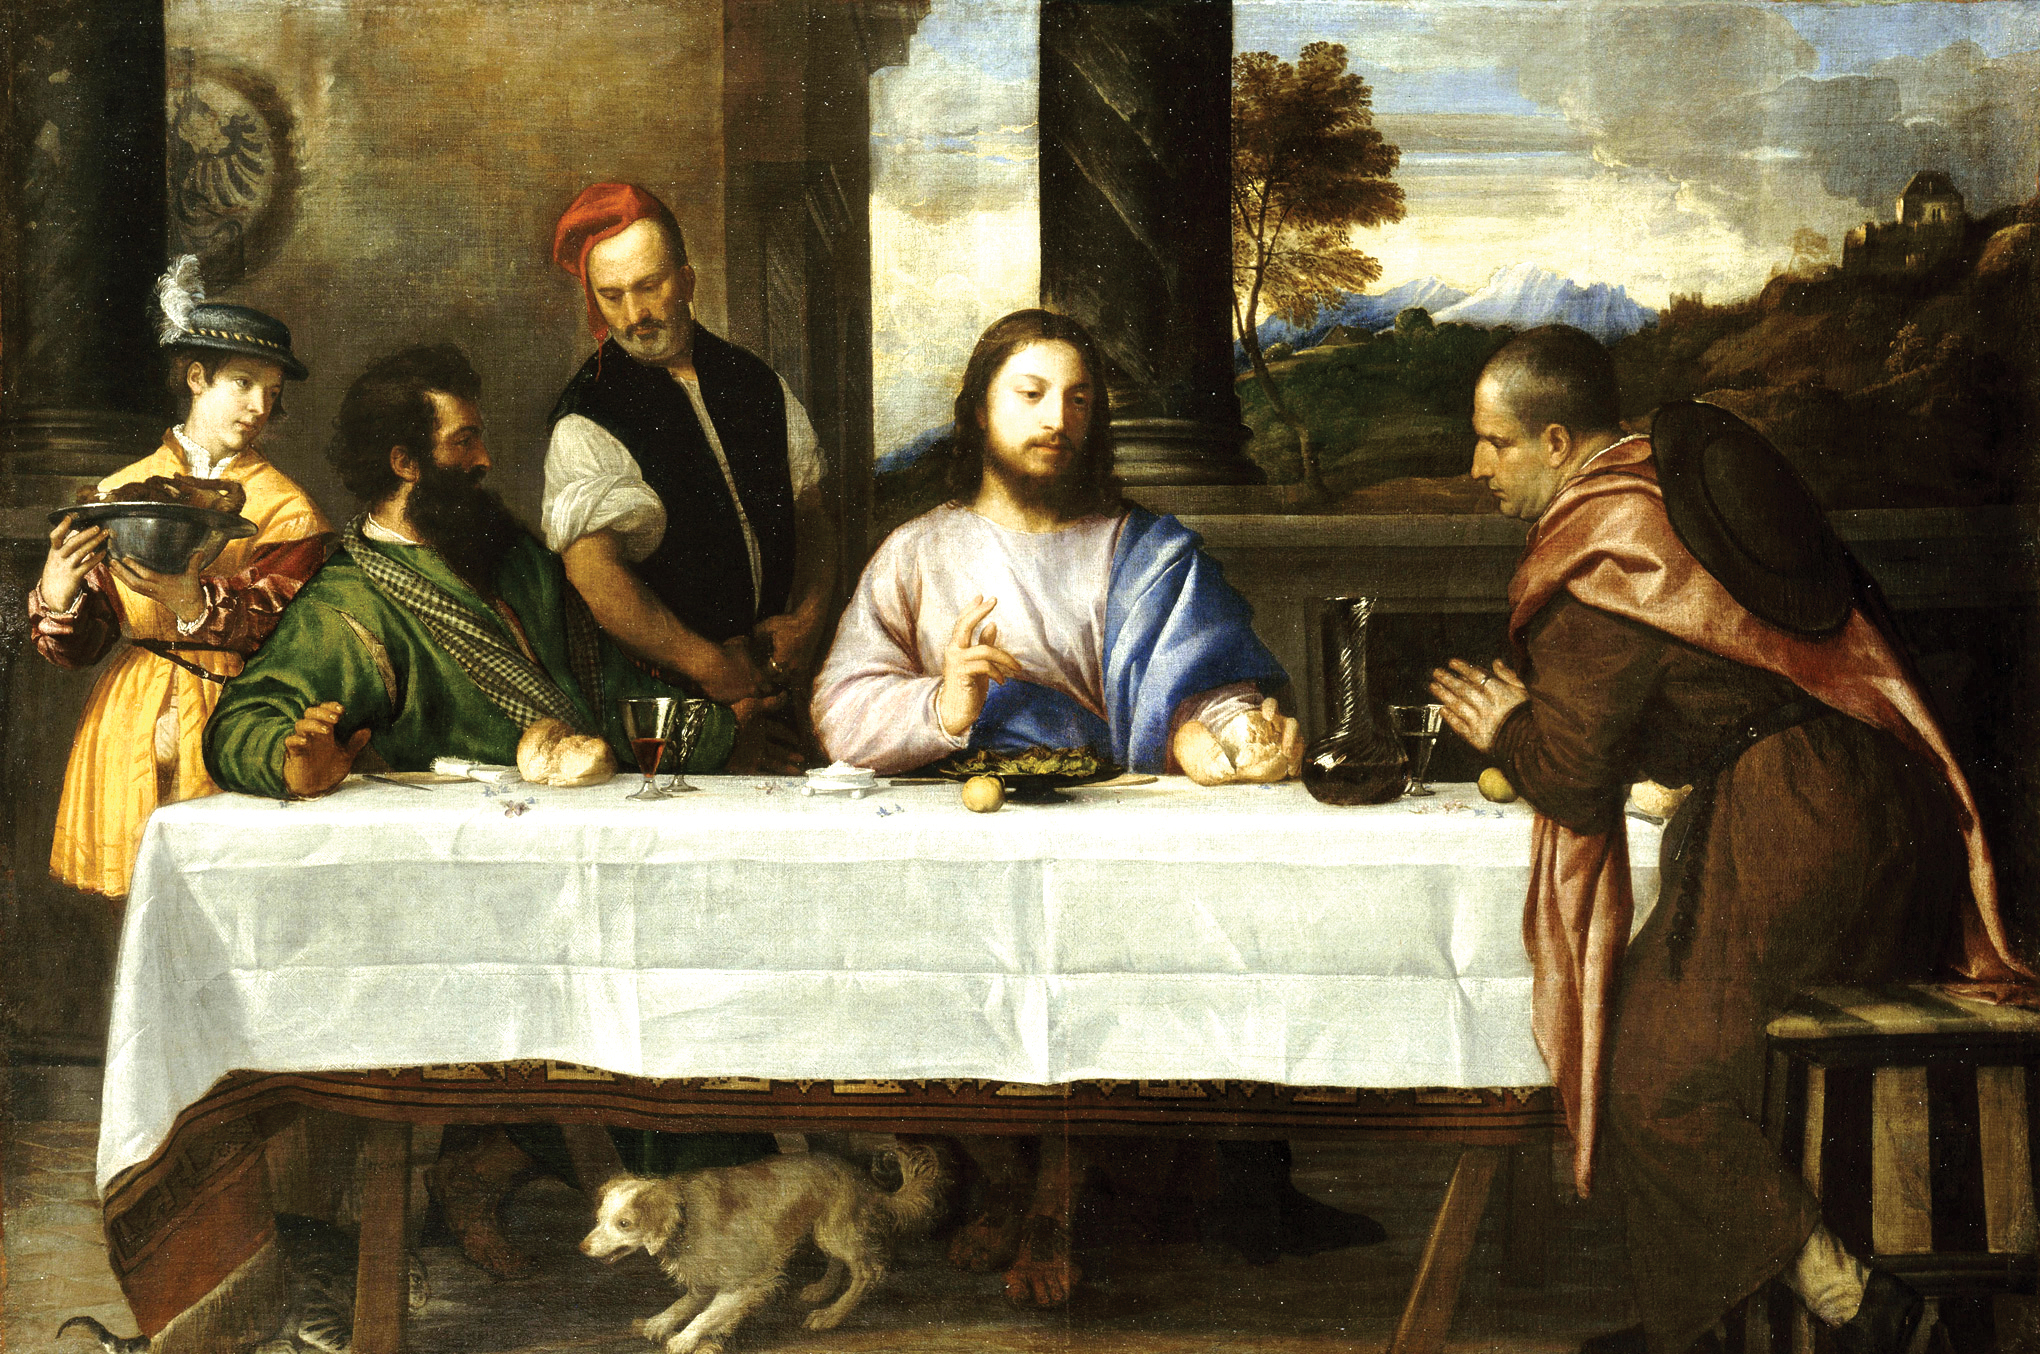 The Supper at Emmaus, by Titian. 1535